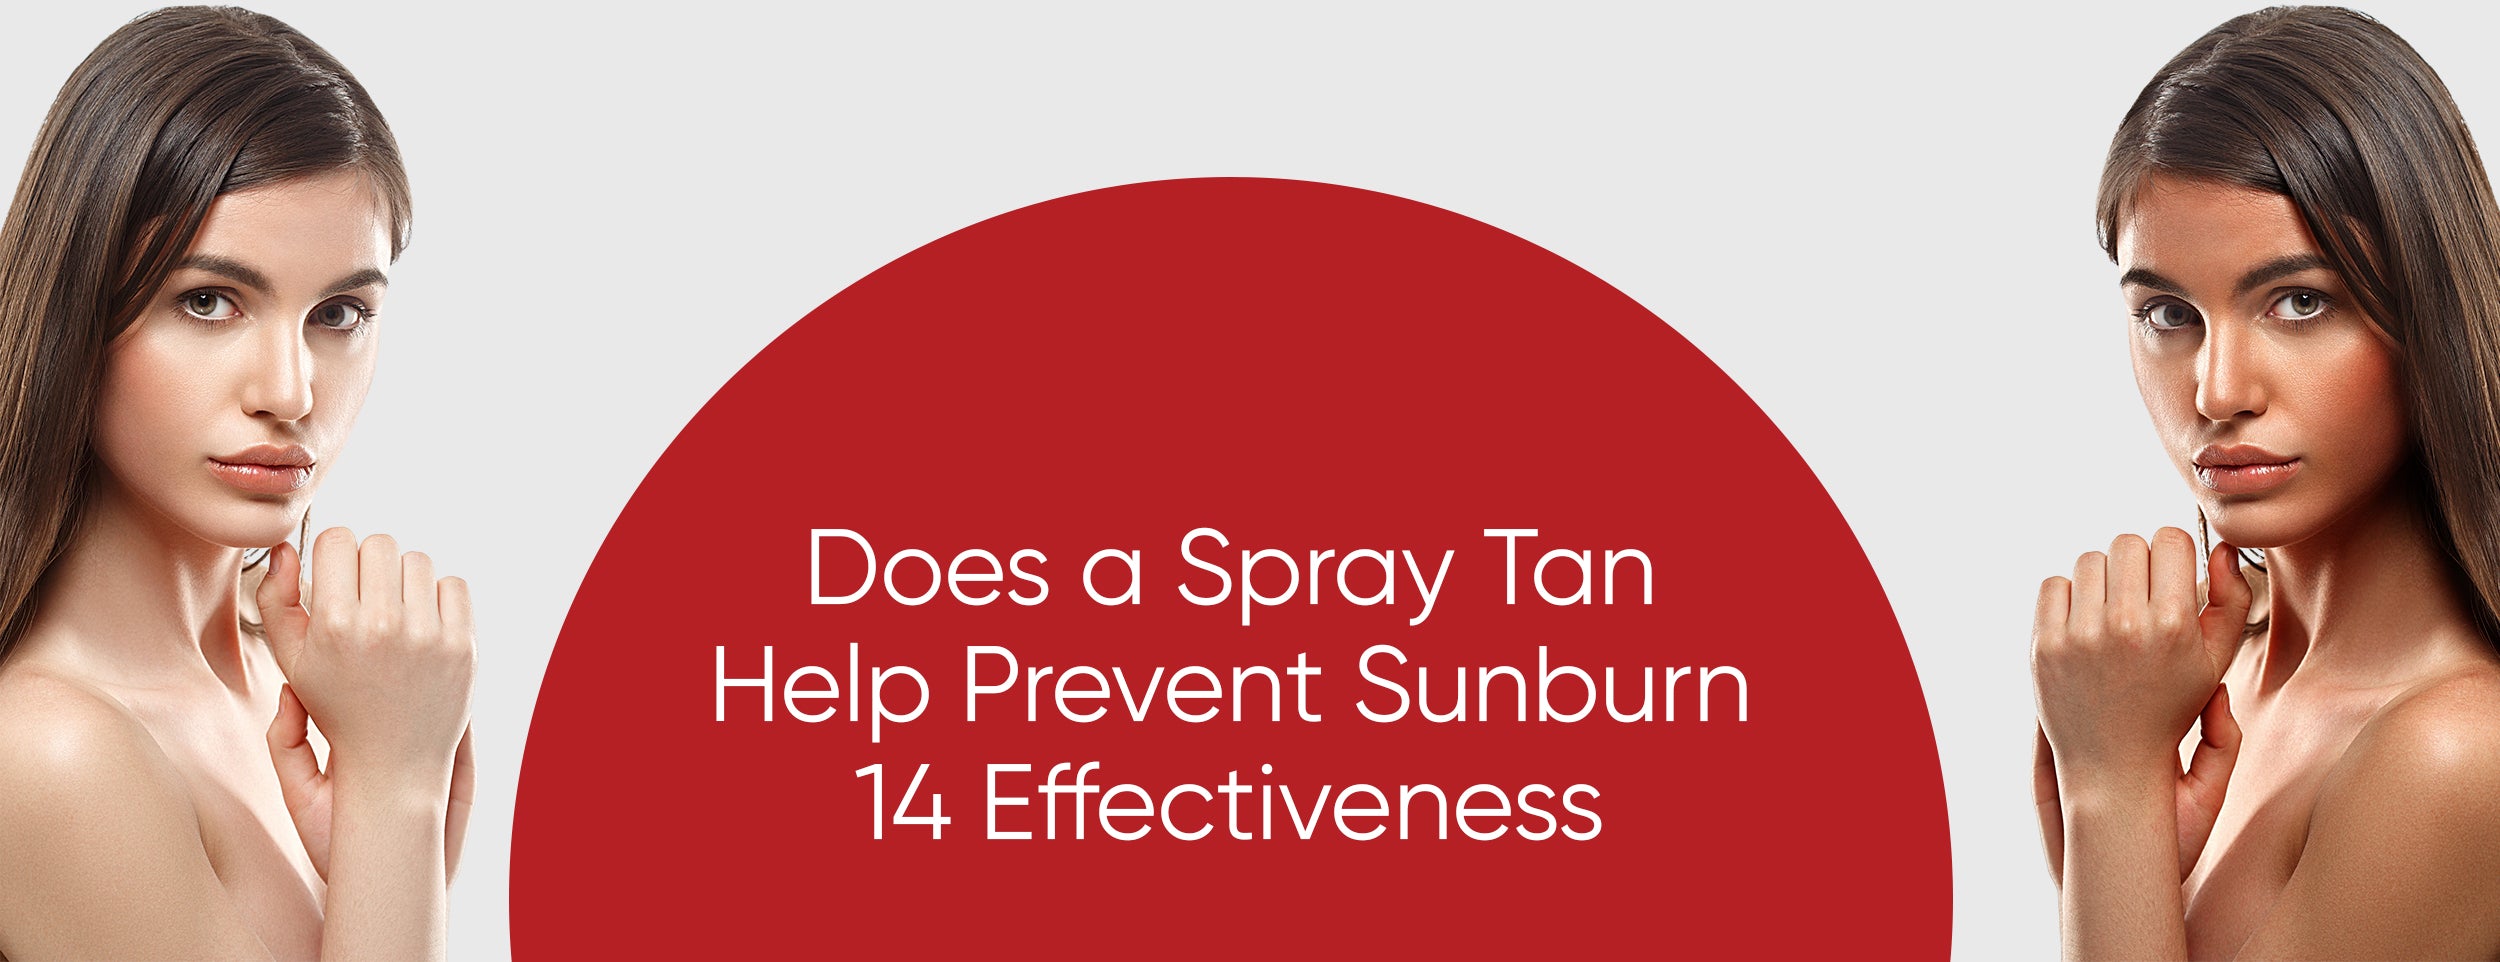 Preventing sunburn with spray tans: 14 Effectiveness Facts